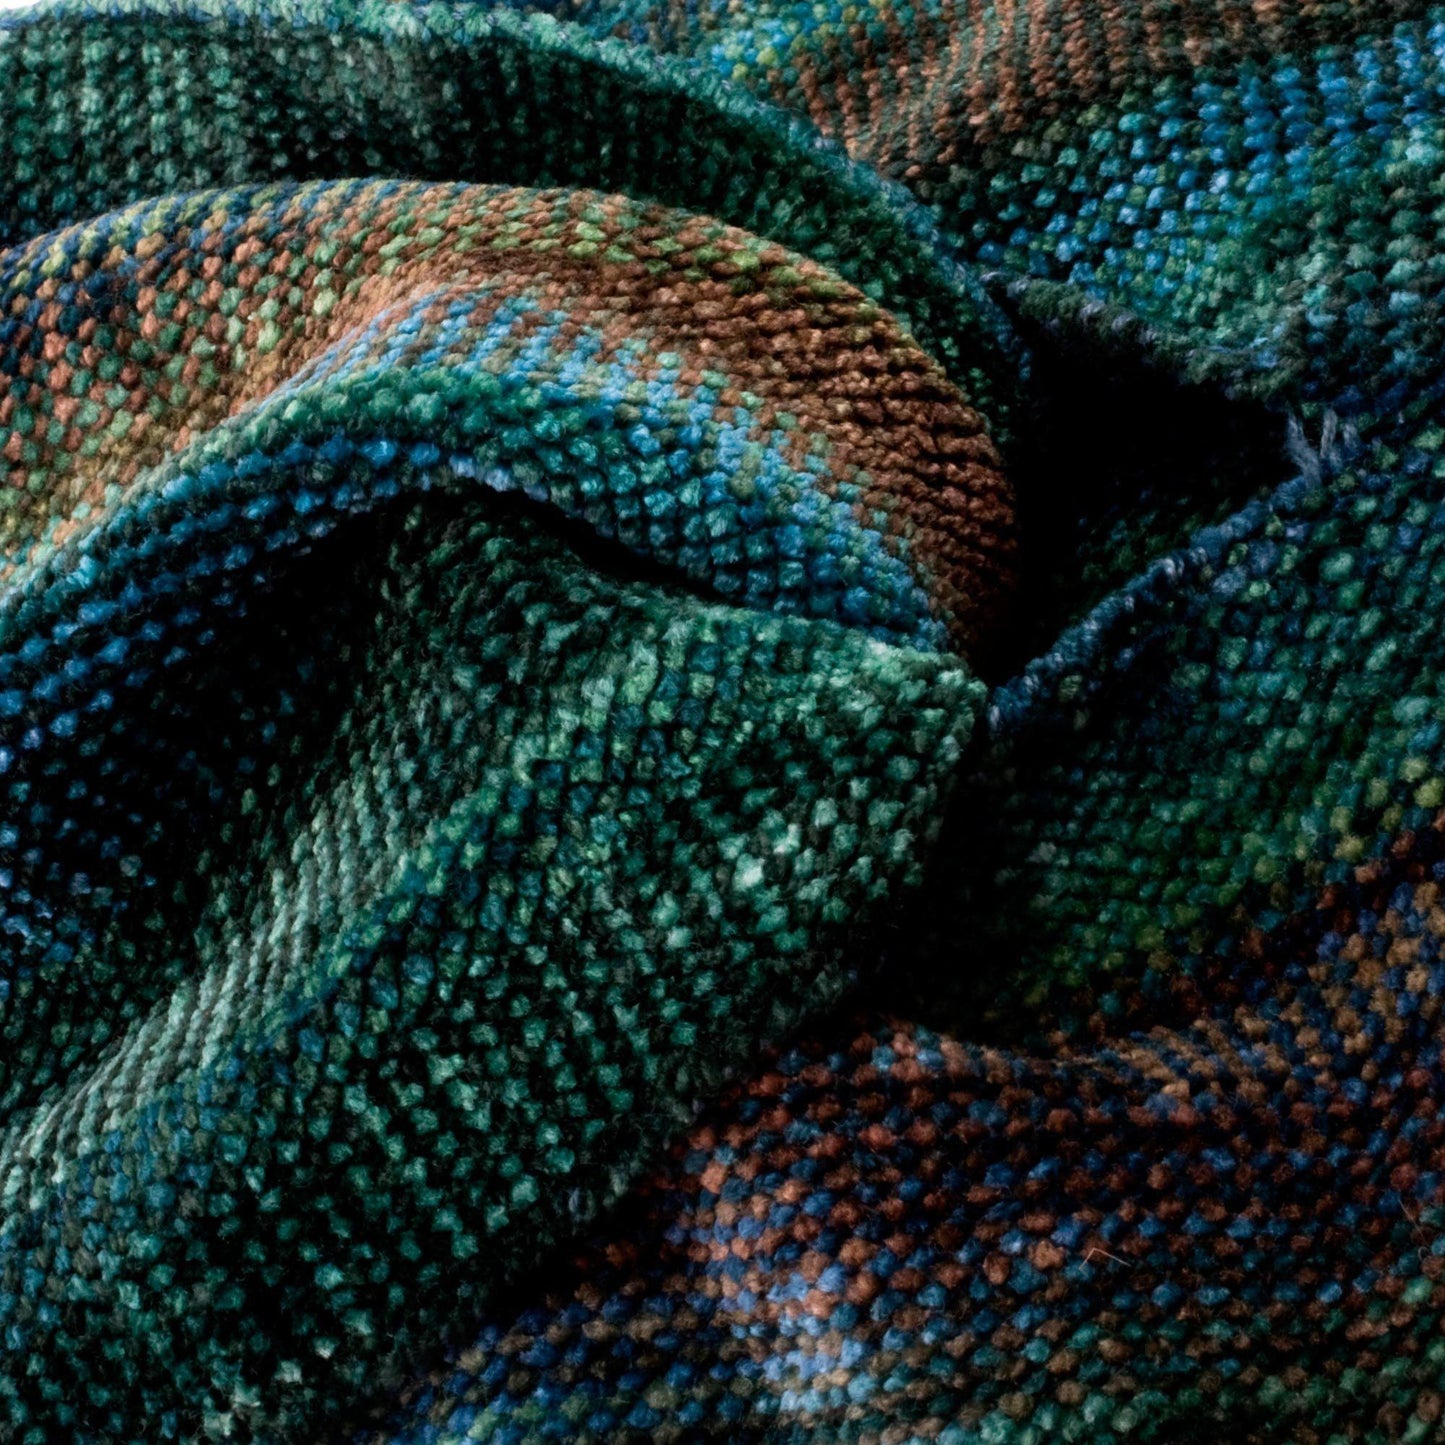 Handcrafted Emerald Scarf